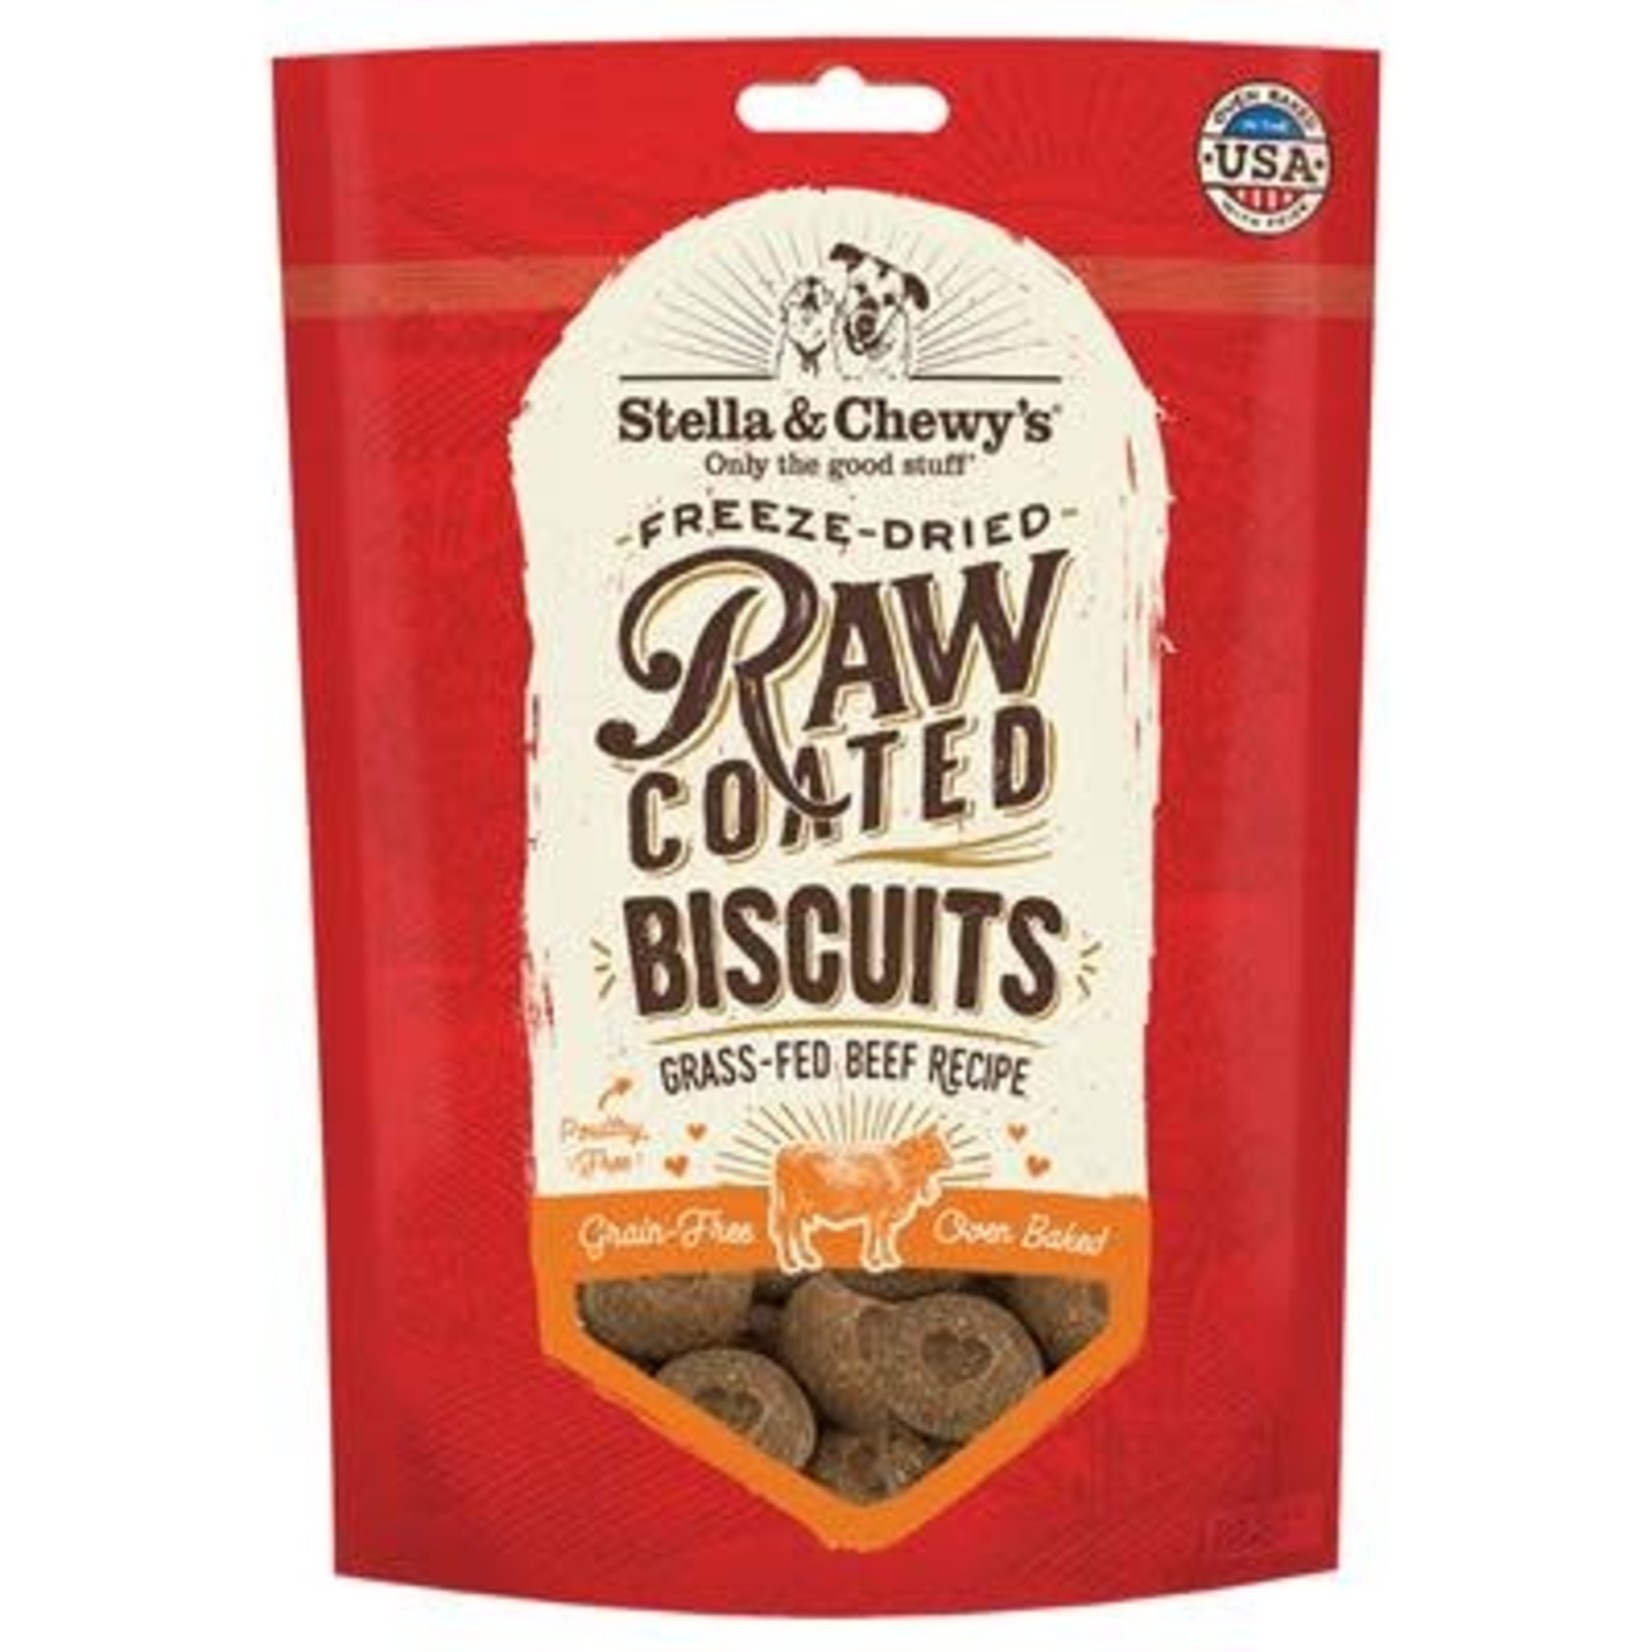 Stella & chewy's Stella & Chewy's FD Raw Coated Biscuits 9OZ